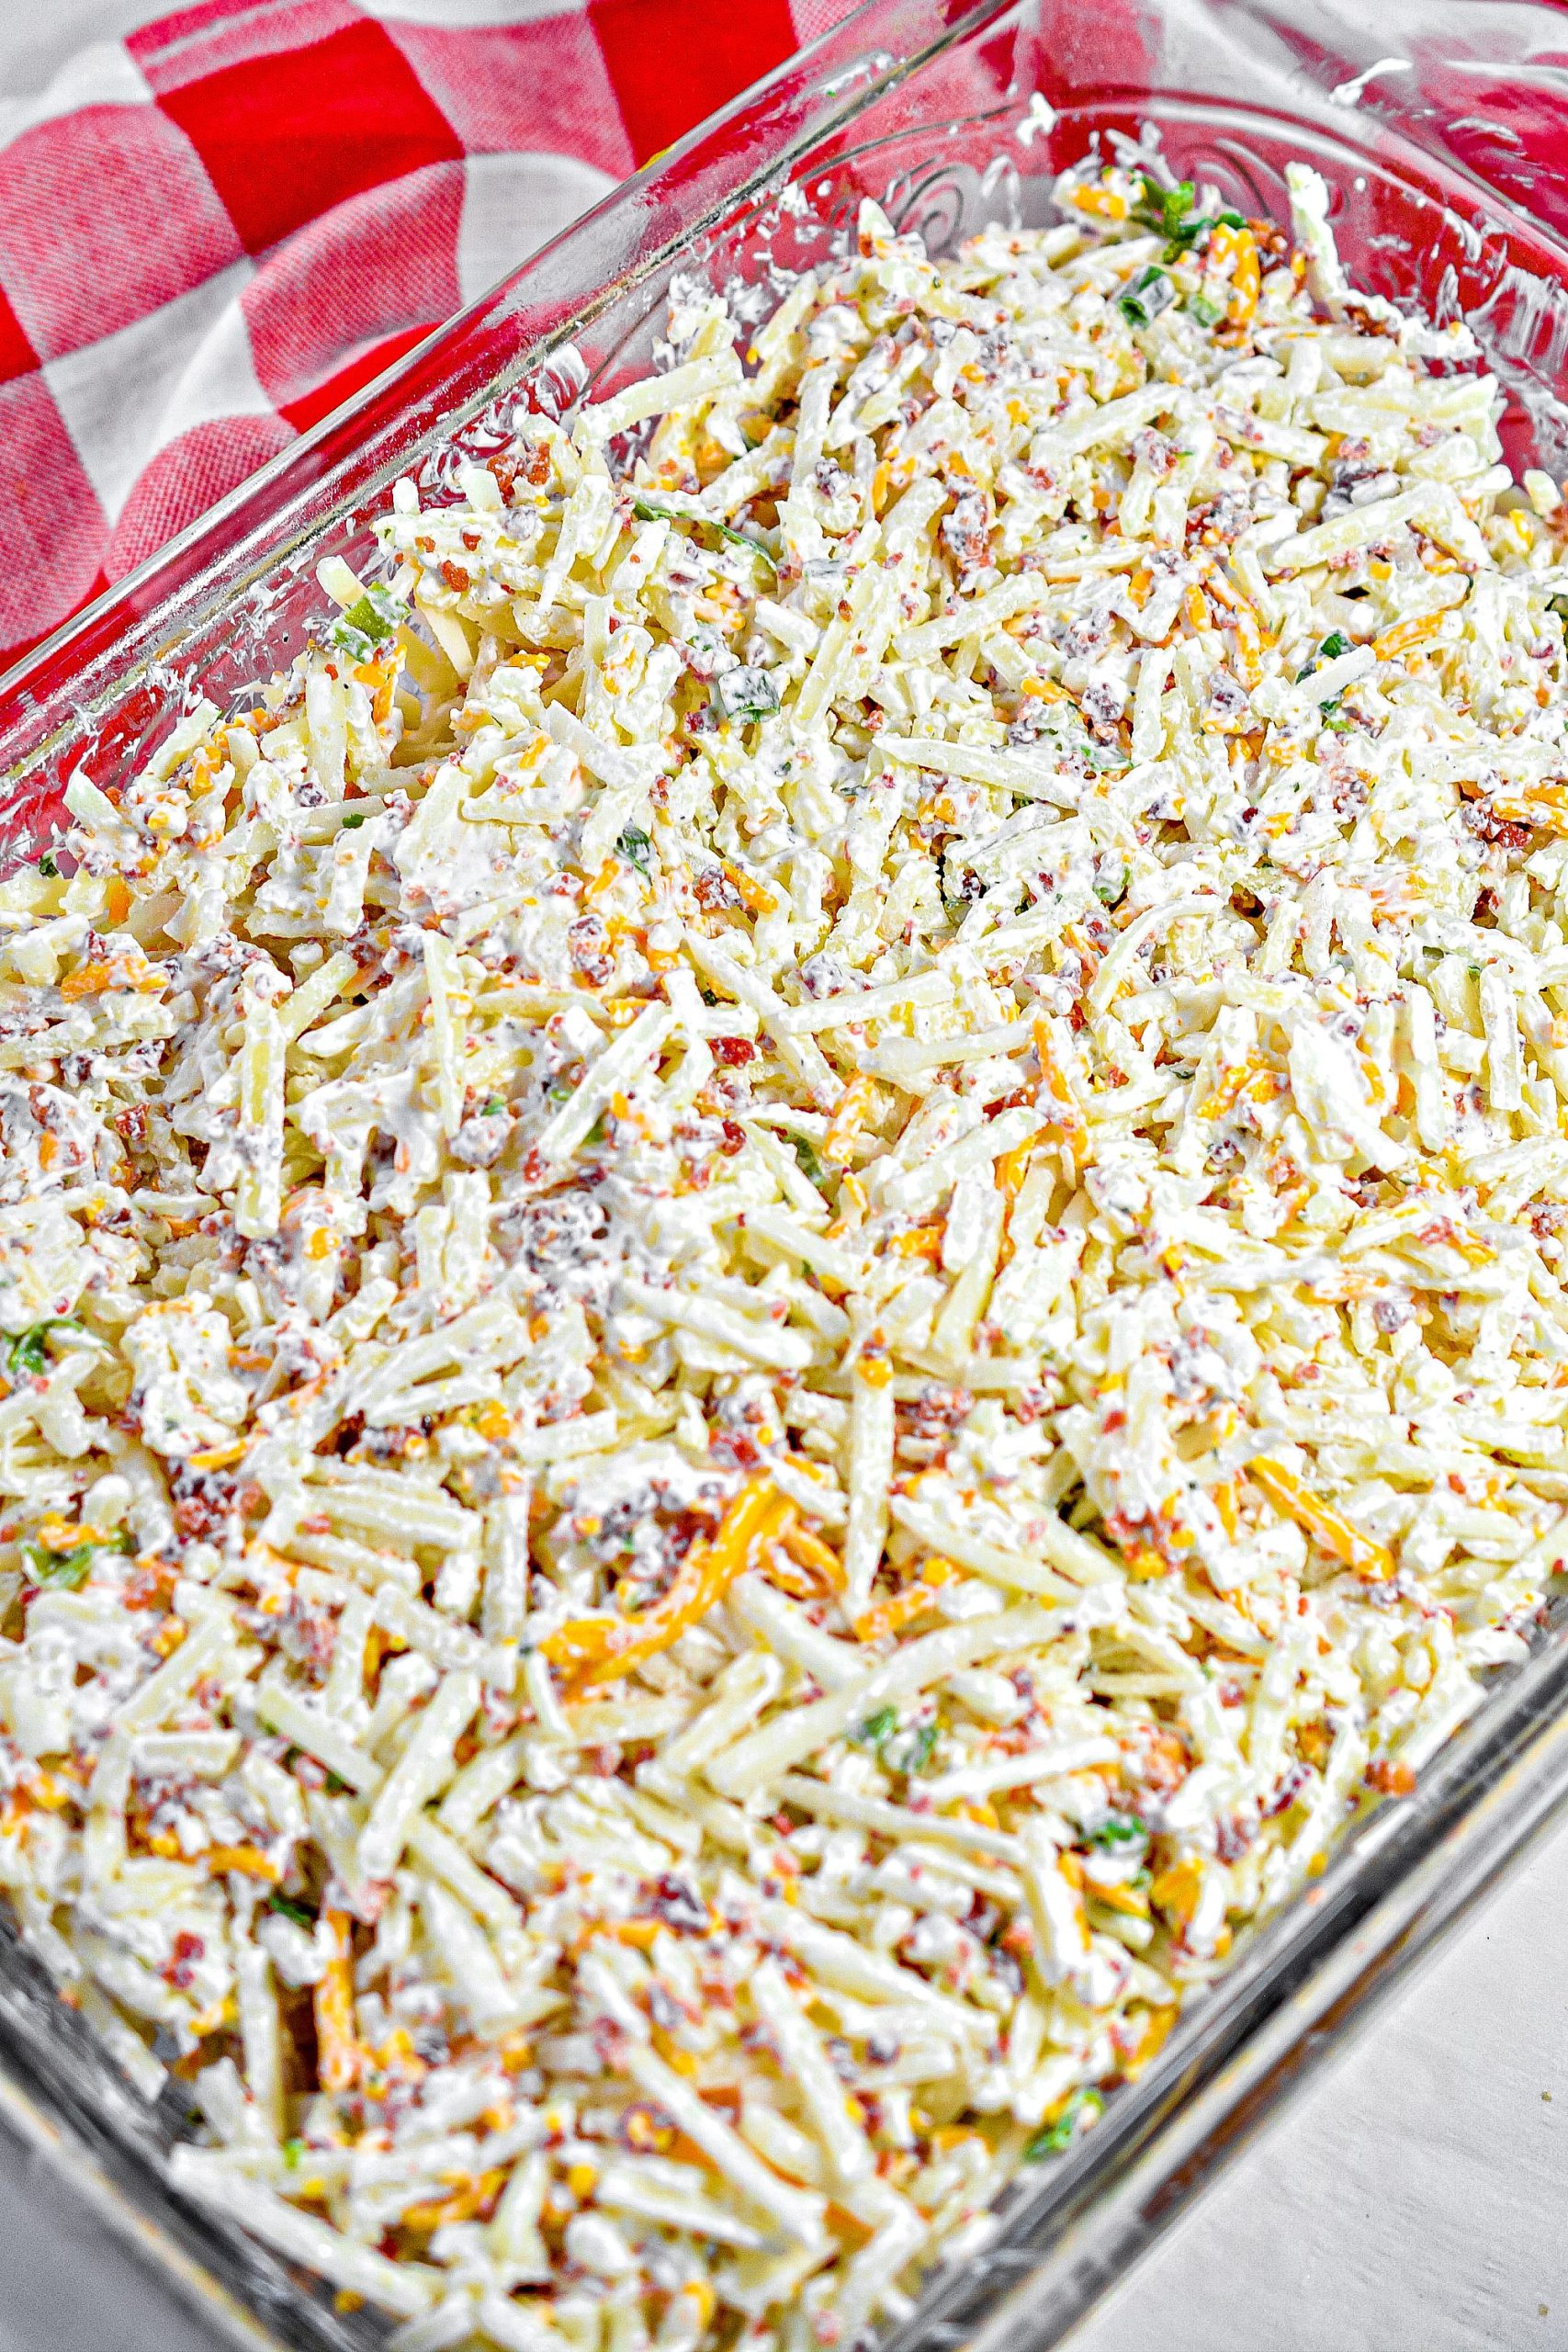 Layer the ingredients into the bottom of a well-greased 9x13 baking dish.